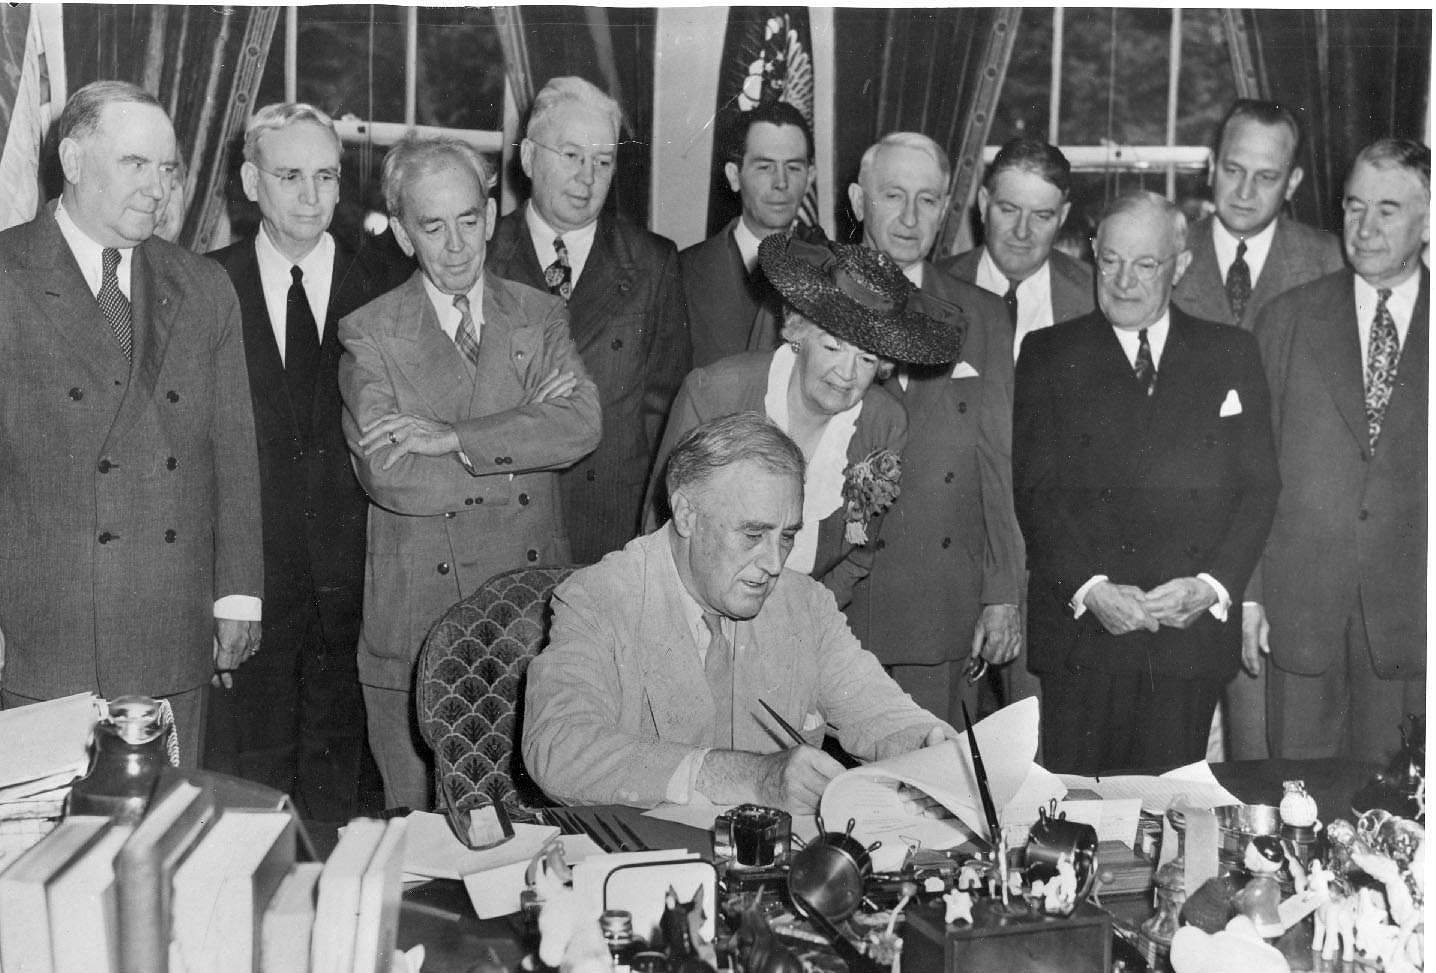 Today in military history: FDR signs the GI Bill into law